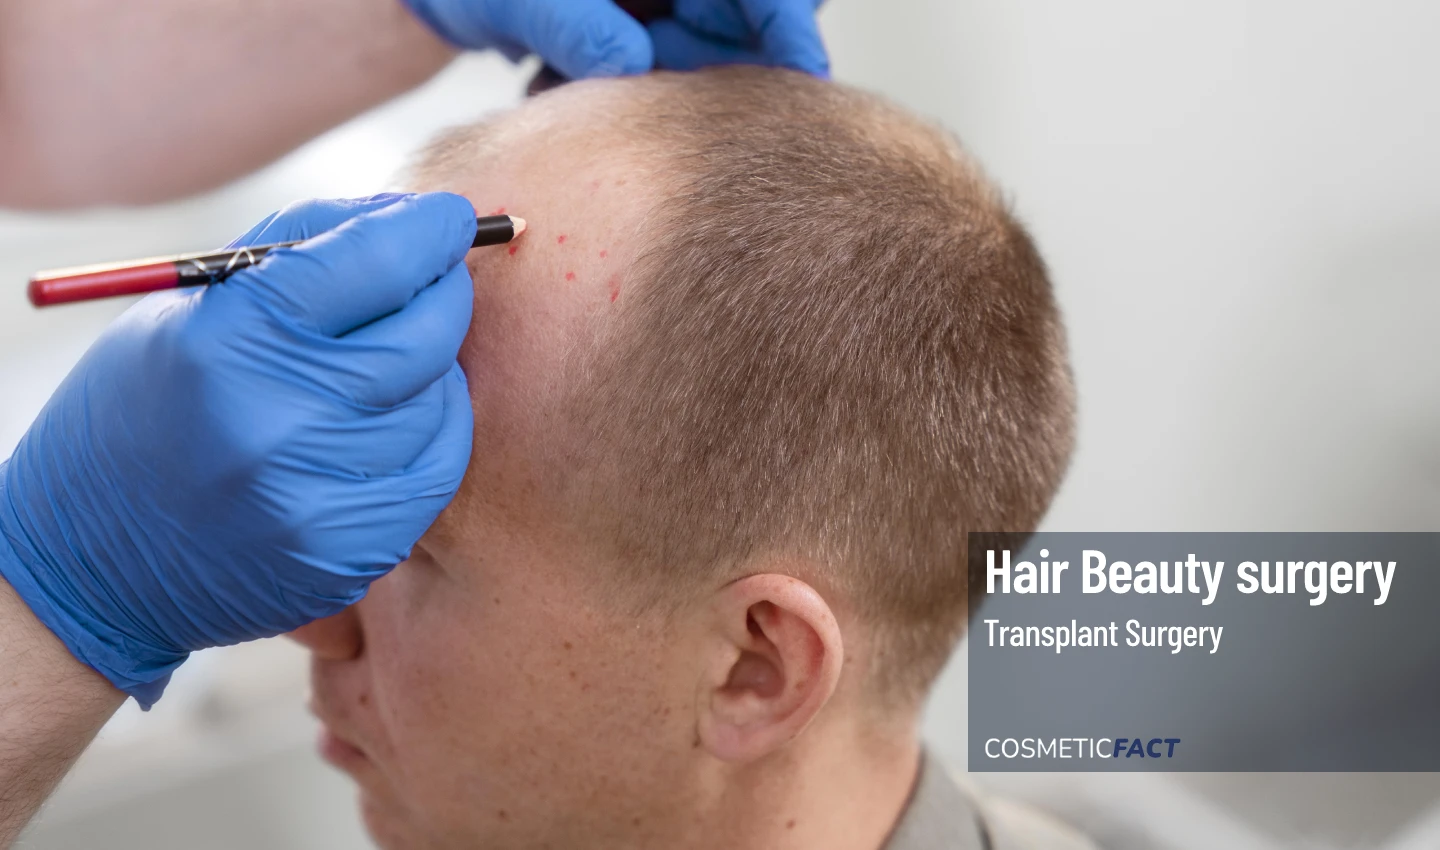 A doctor makes marks on a scalp in preparation for hair implantation, representing hair transplant surgery.